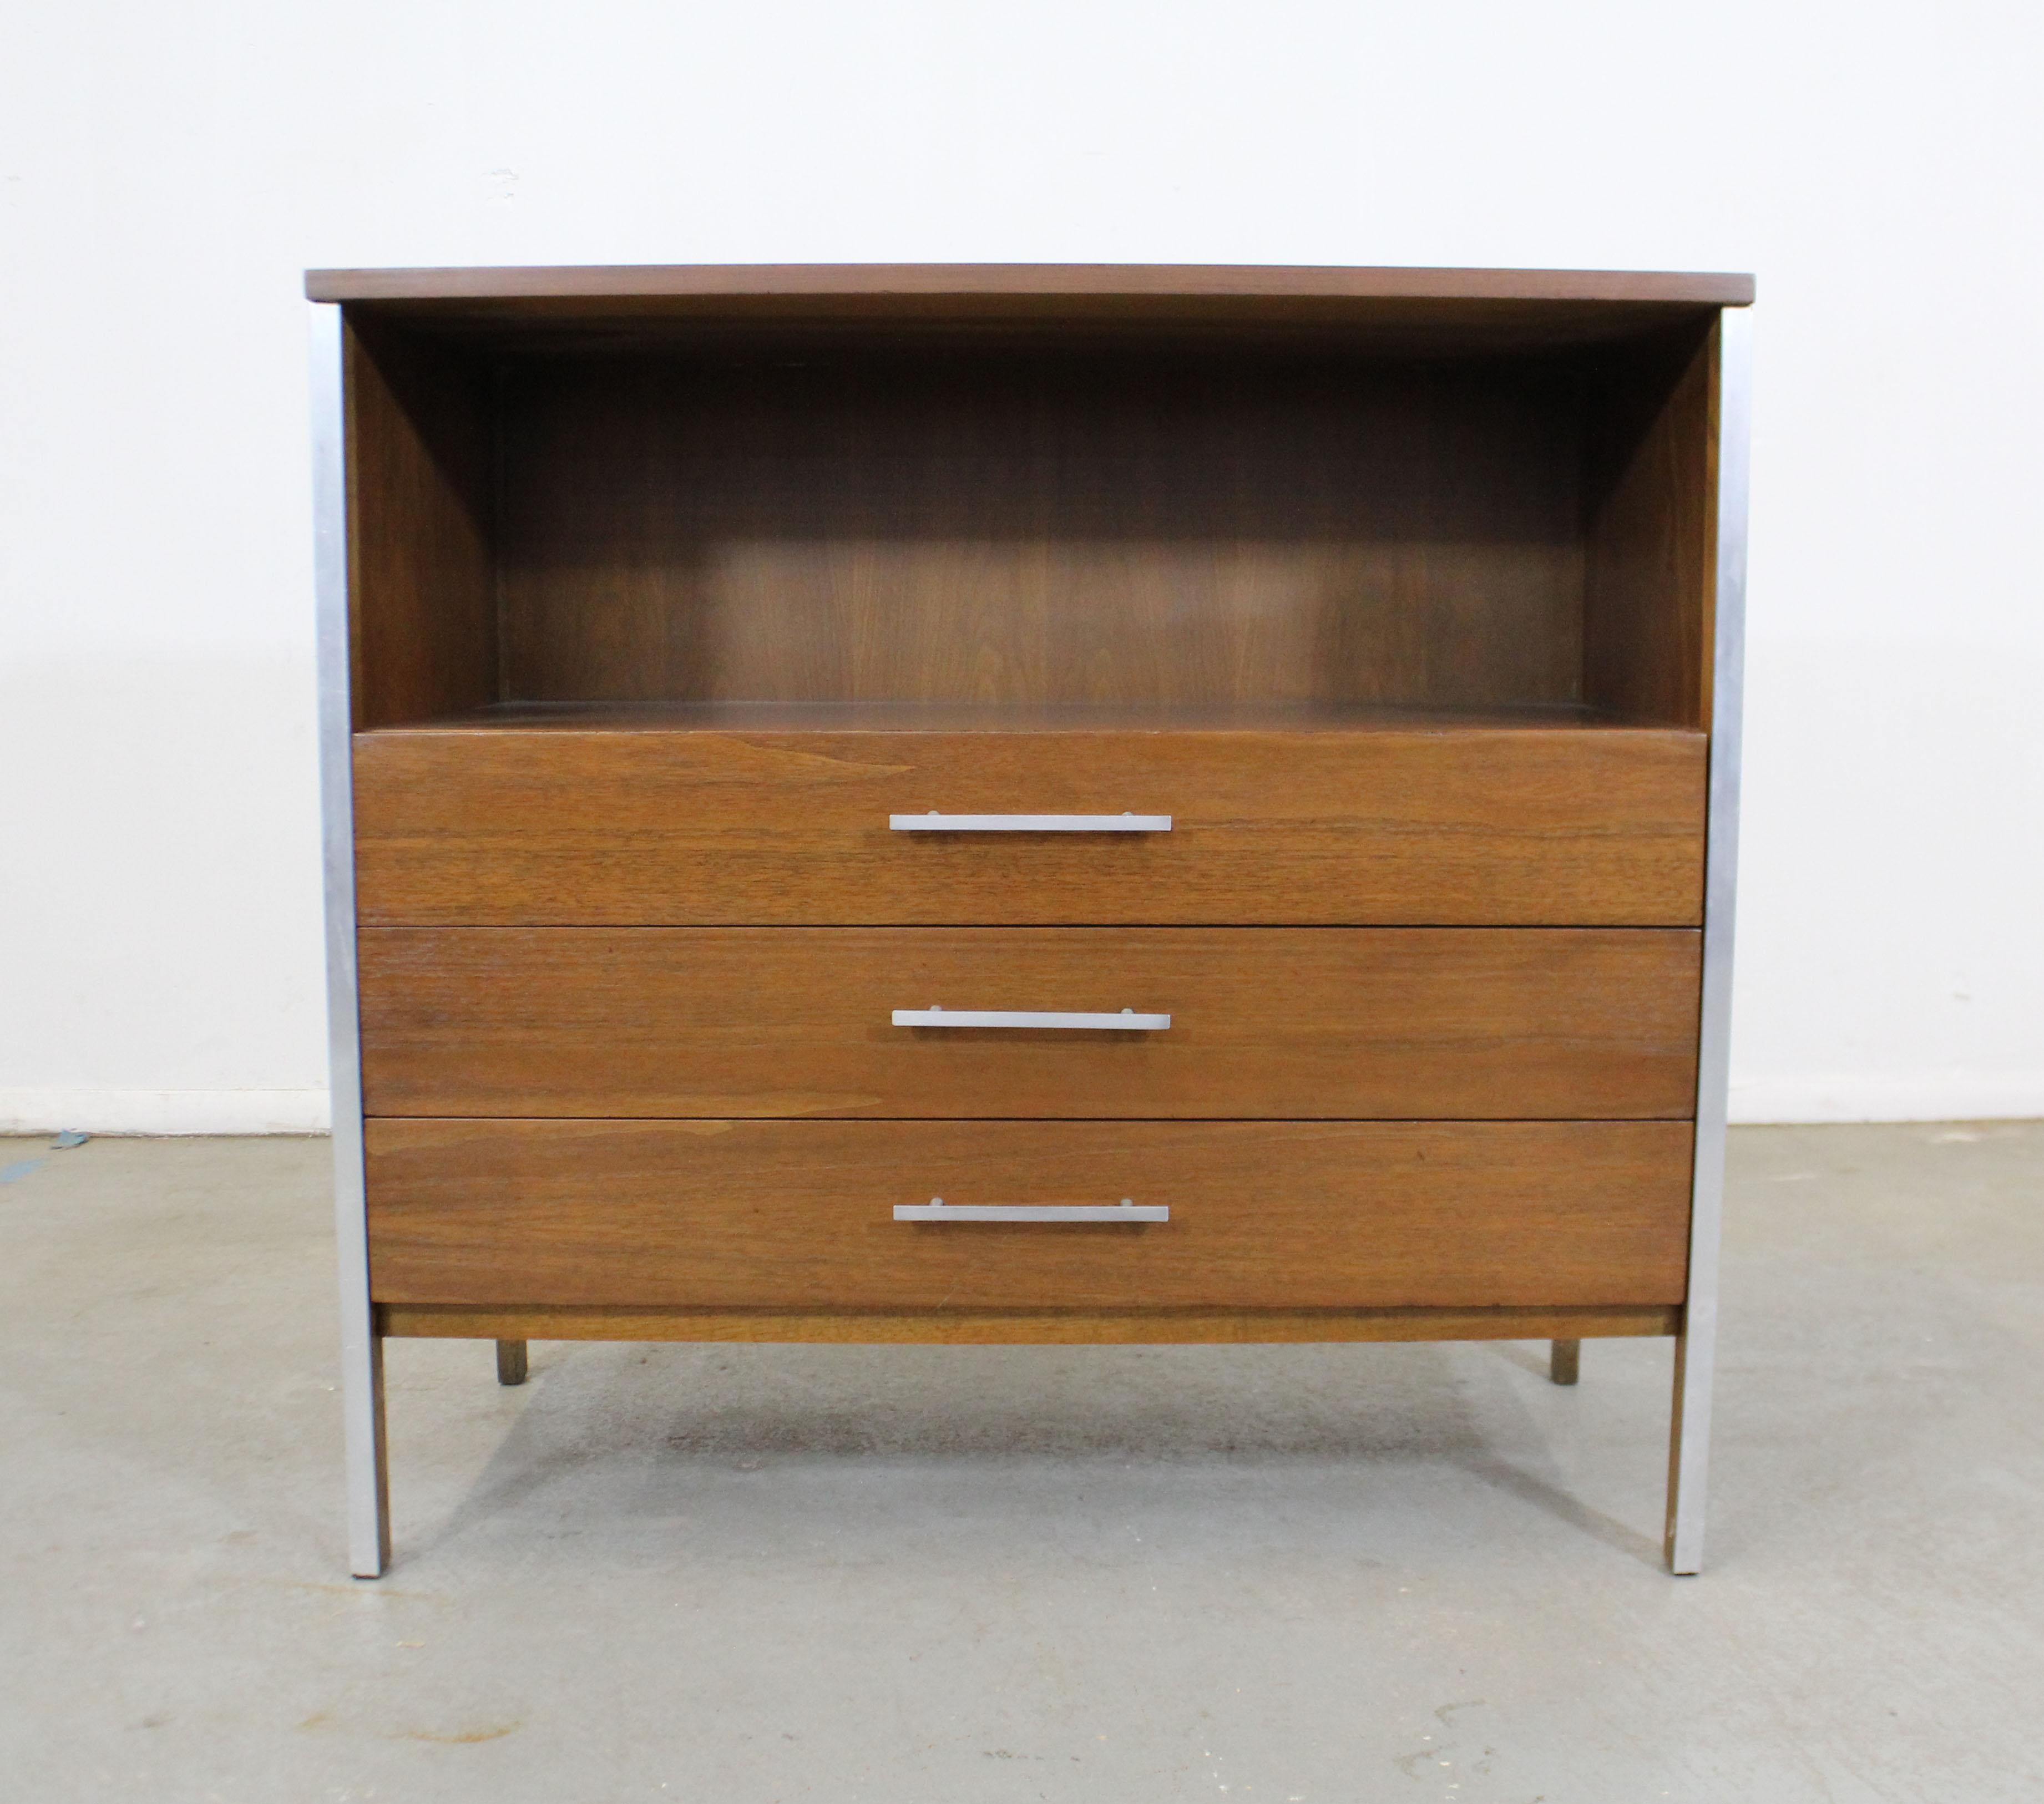 Offered is a vintage Mid-Century Modern bachelor chest by Paul McCobb for Calvin Group. It is made of walnut with aluminum inserts. It is in excellent condition for its age. Has been refinished, has some slight edge wear and a few scratches, but